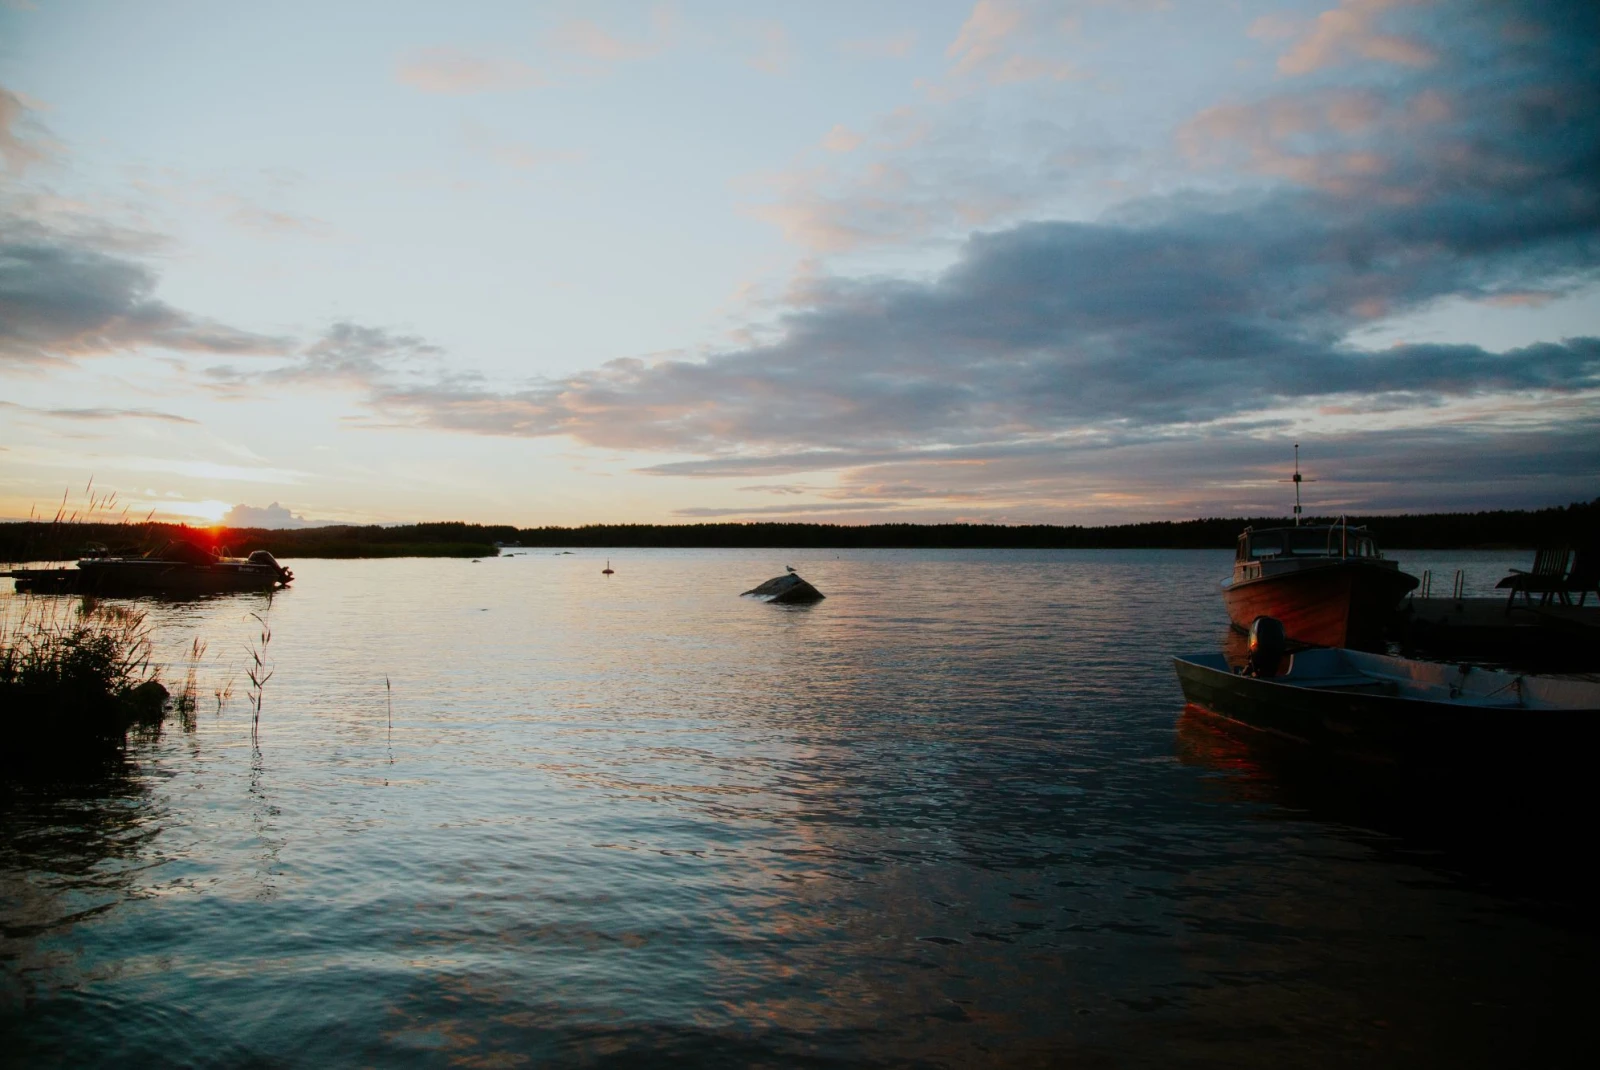 small old motor boat on calm waters at sunset